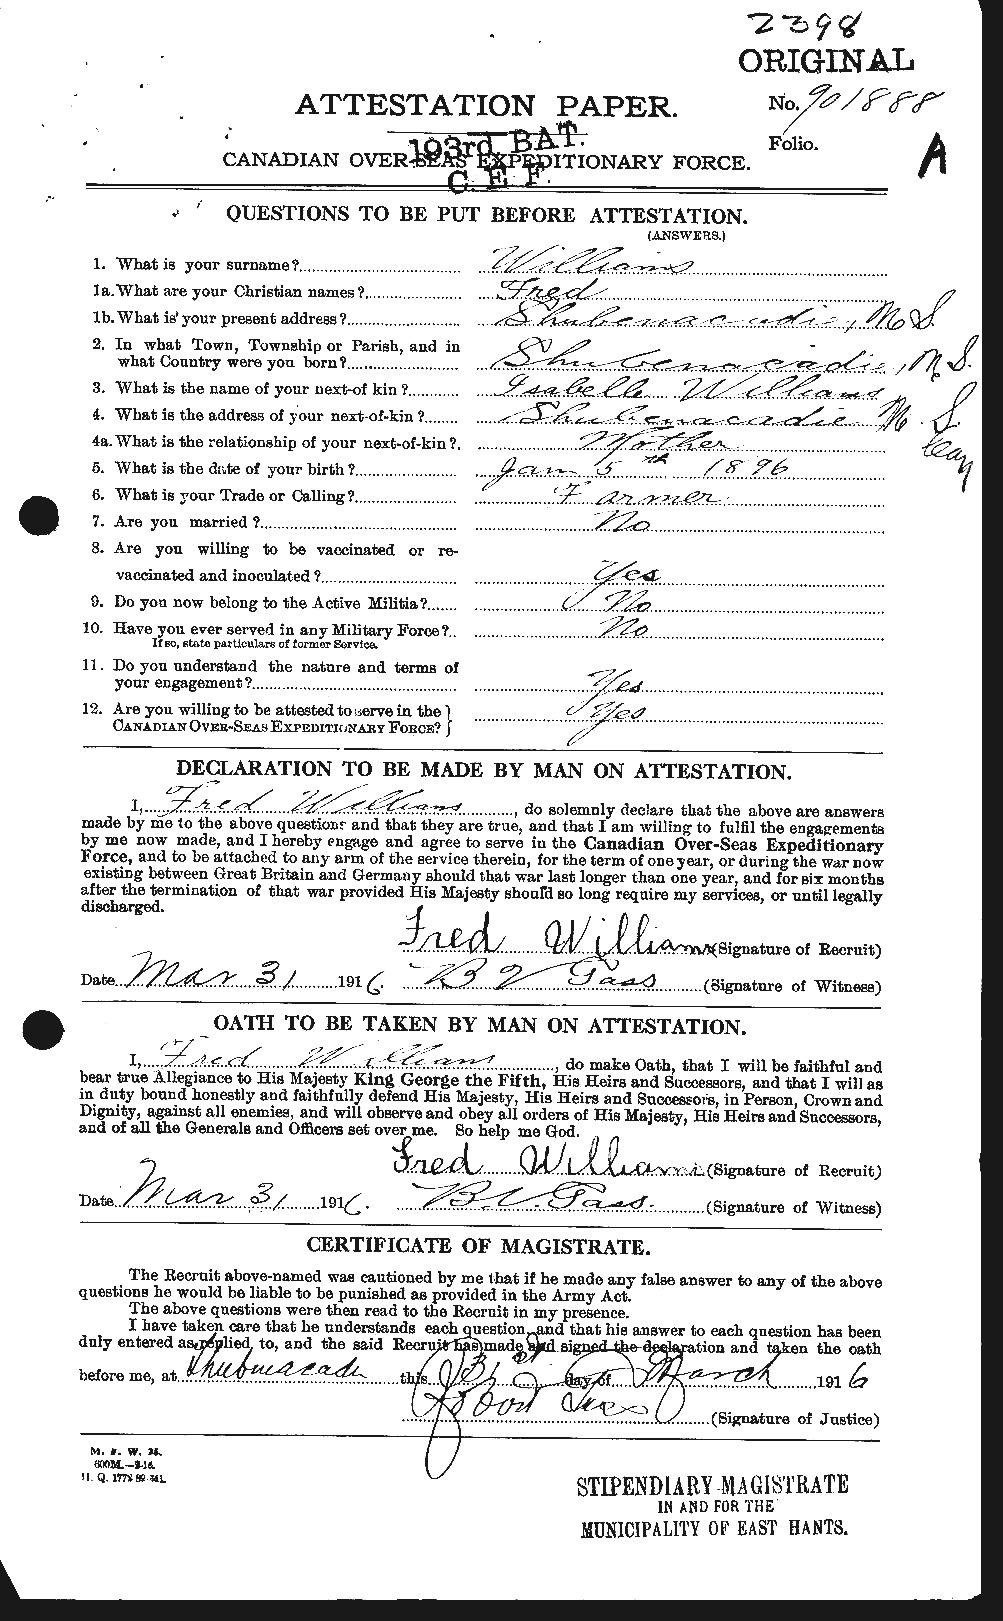 Personnel Records of the First World War - CEF 675891a